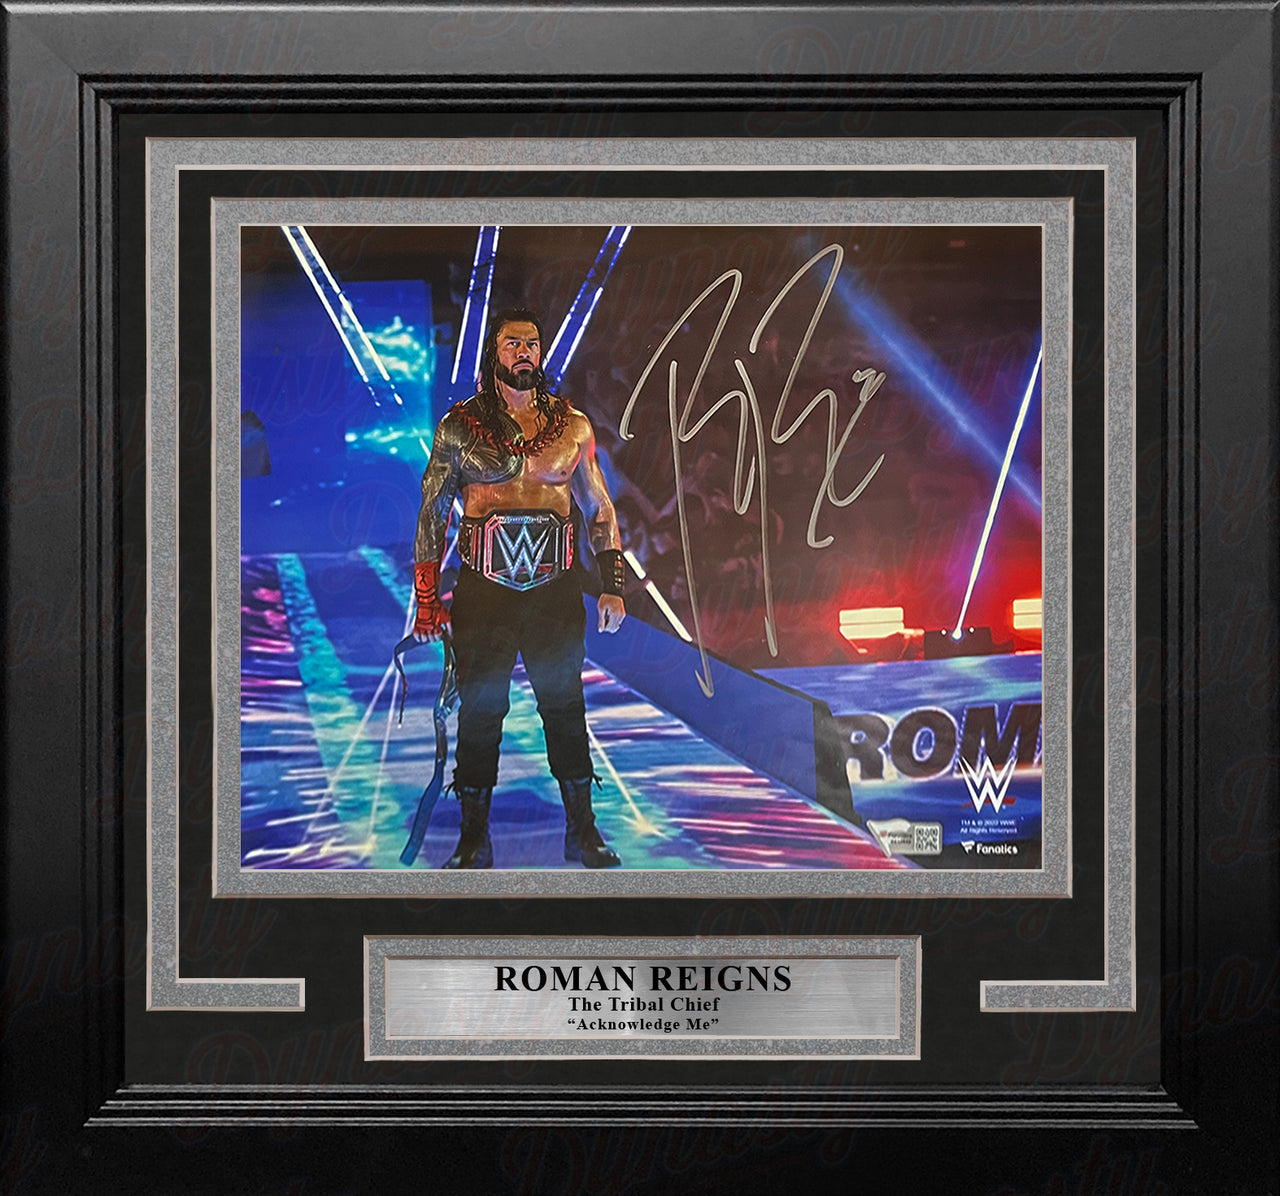 Roman Reigns Tribal Chief Entrance Autographed Framed WWE Wrestling Photo - Dynasty Sports & Framing 